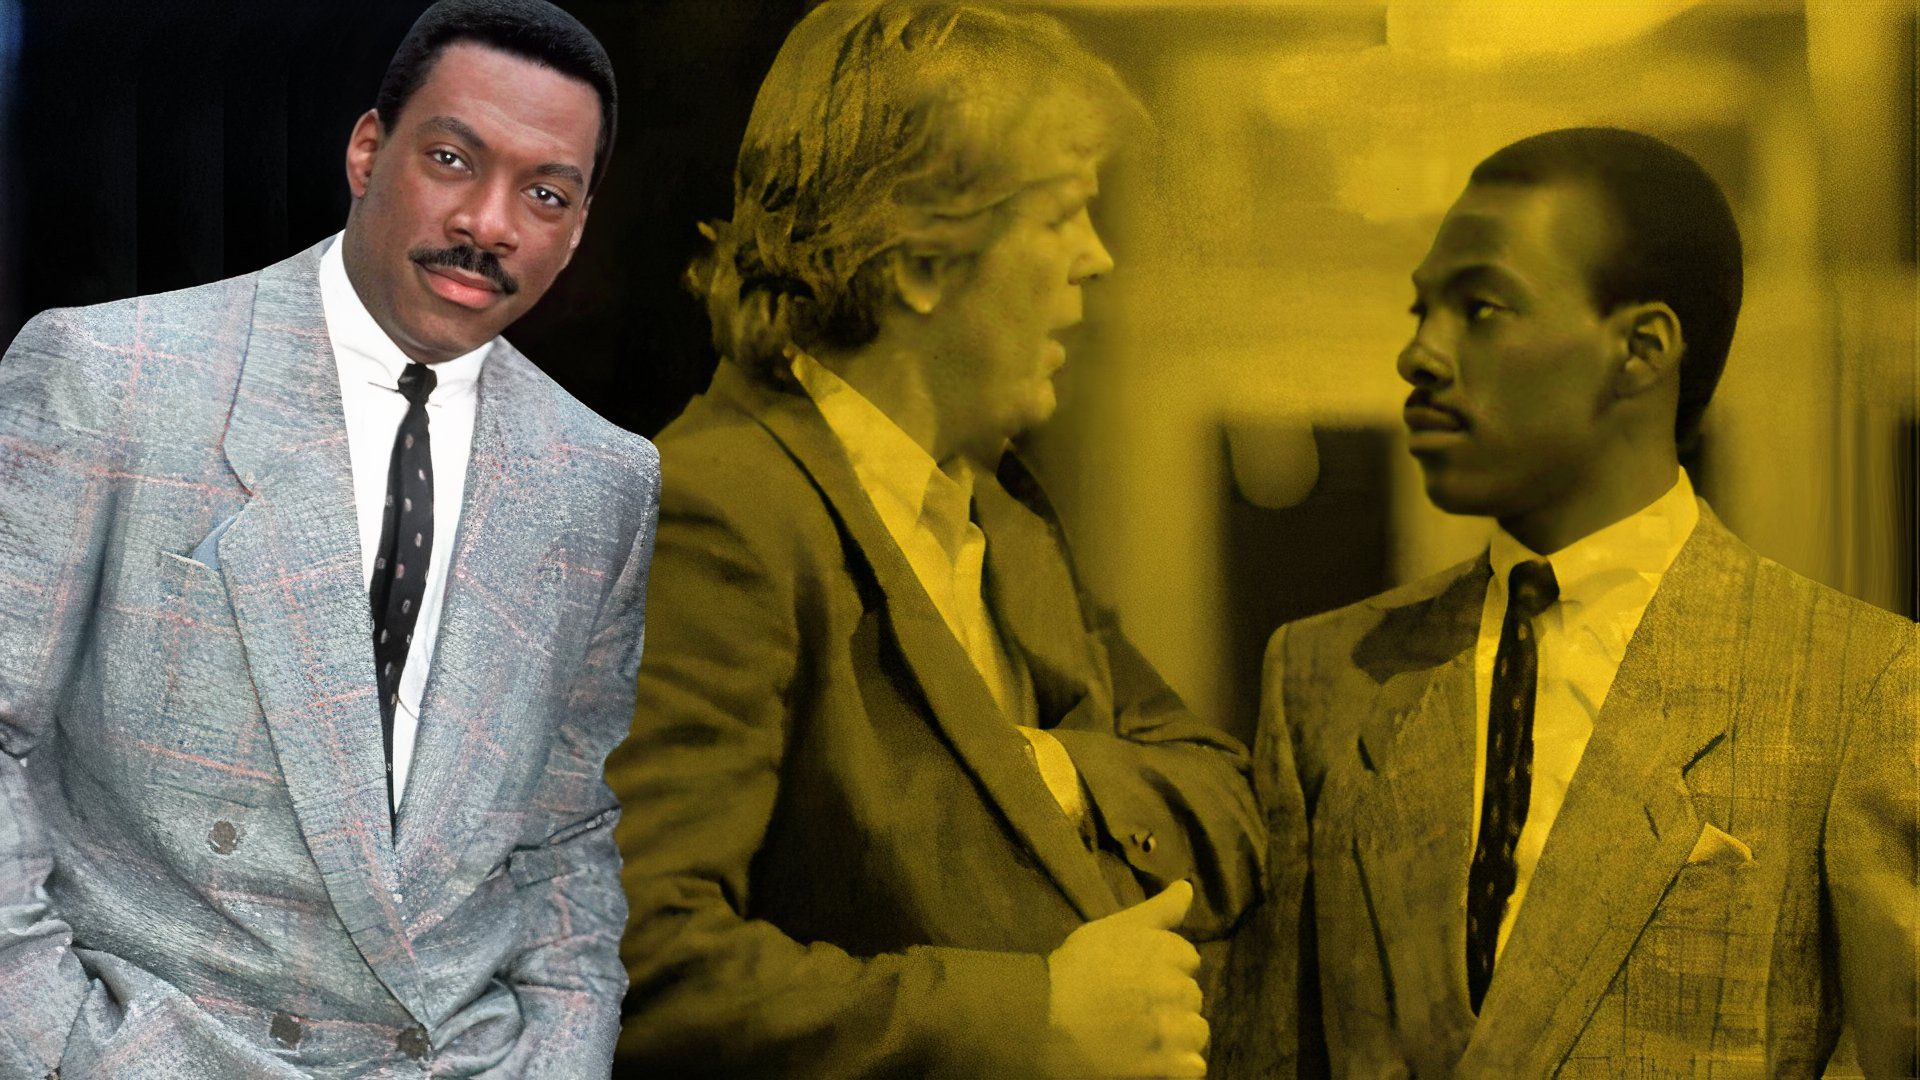 An edited image of Eddie Murphy and Nick Nolte wearing suits in 48 Hrs. 